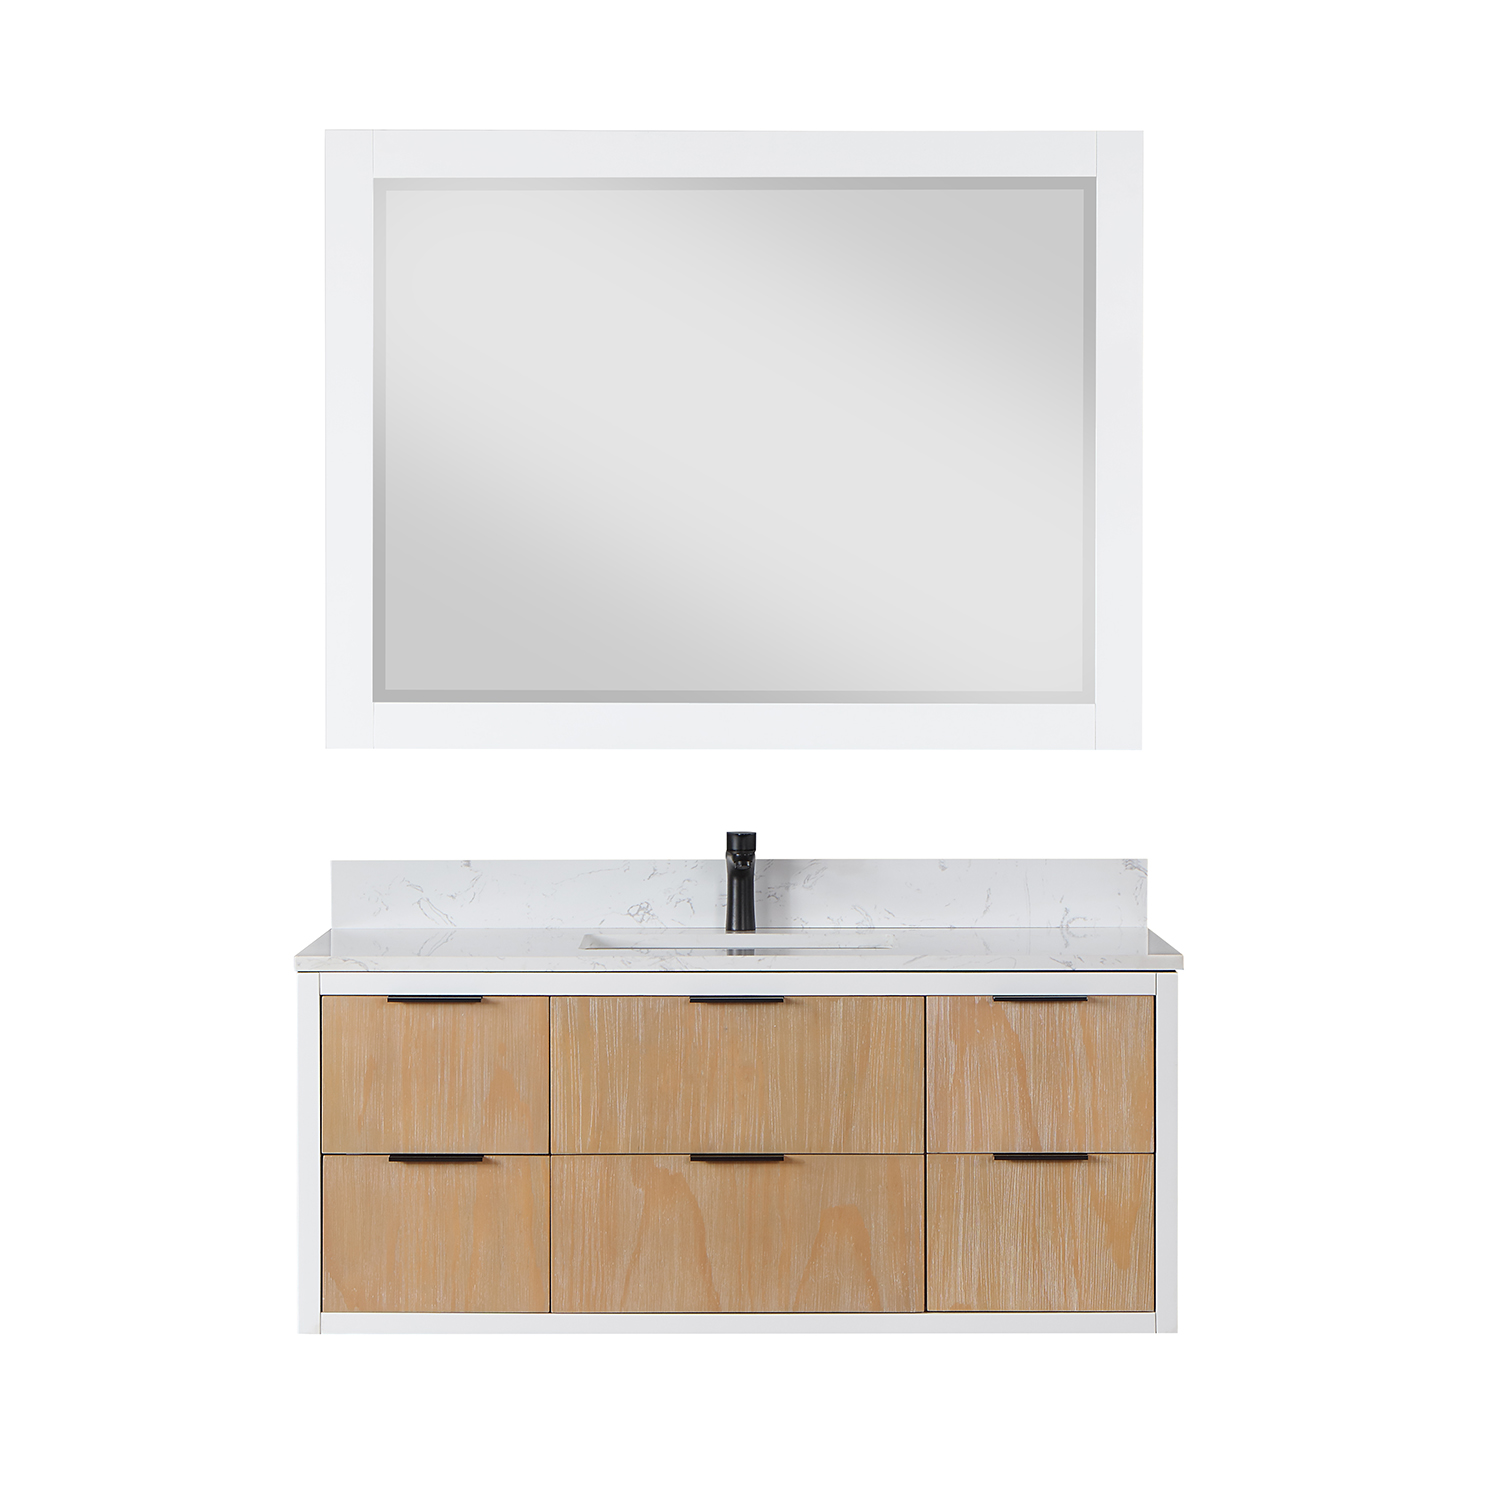 Issac Edwards Collection 48" Single Bathroom Vanity in Weathered Pine with Carrara White Composite Stone Countertop without Mirror 